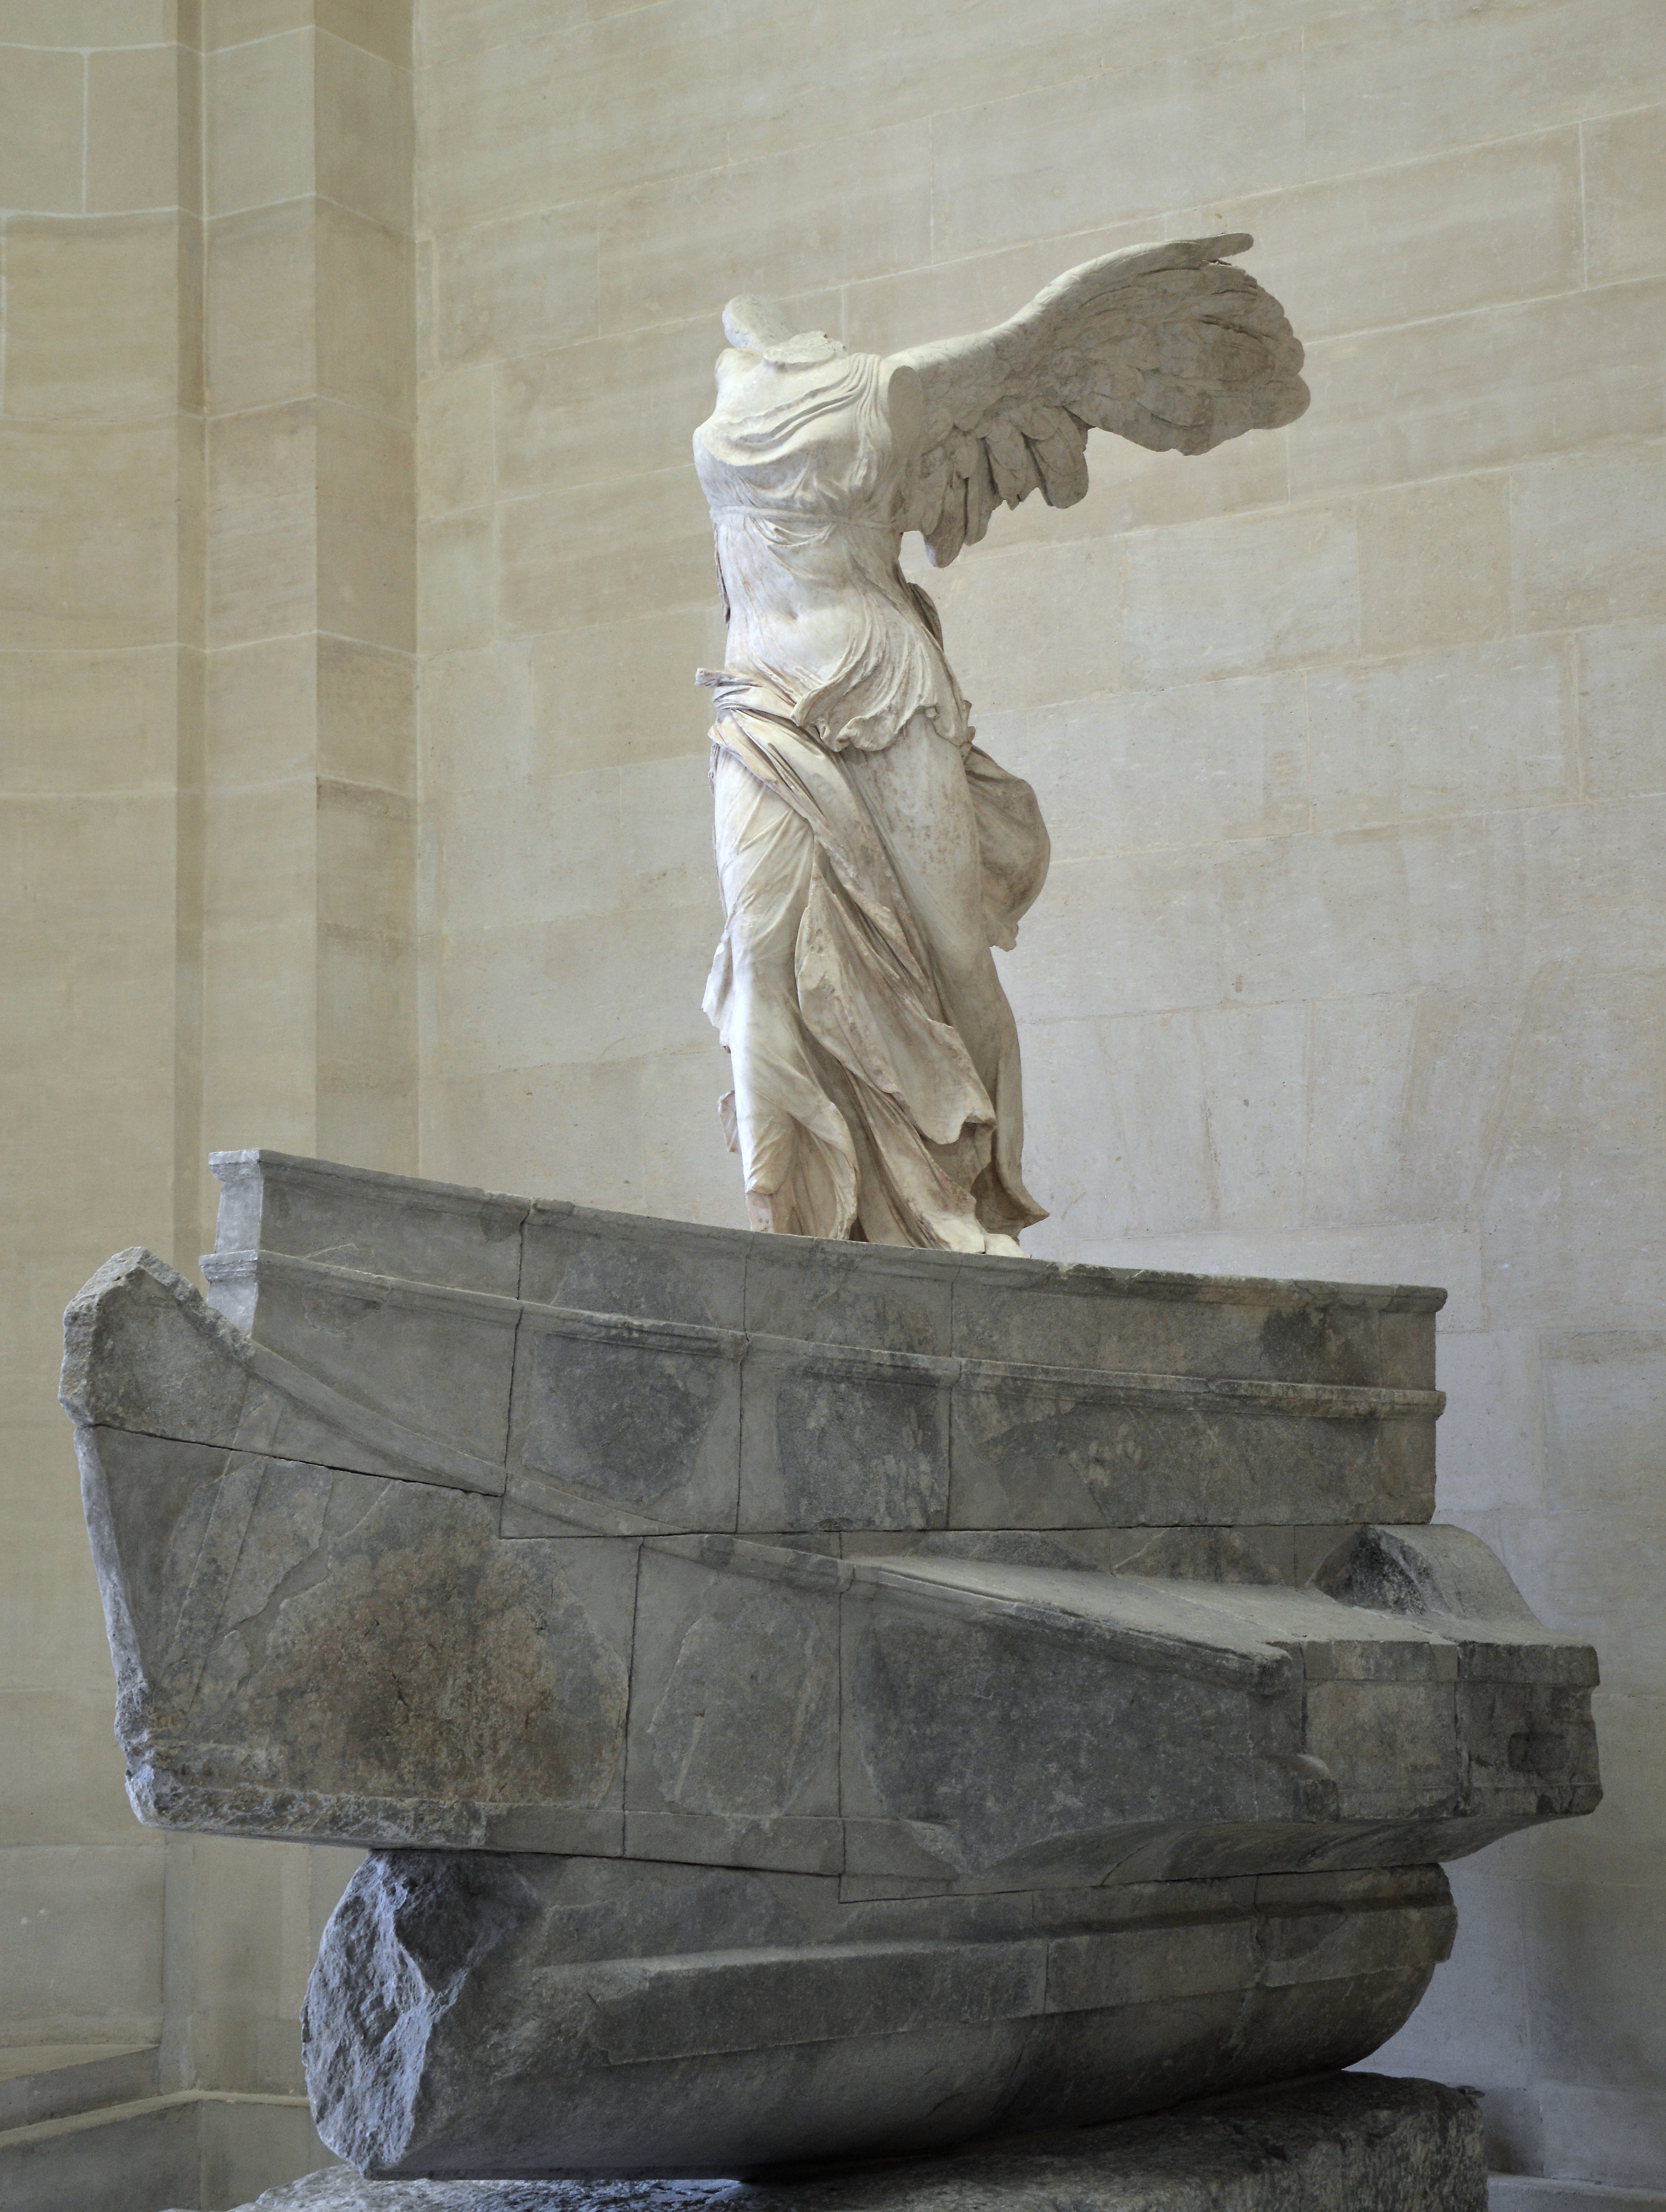 The Nike of Samothrace monument as seen in the Louvre Museum.